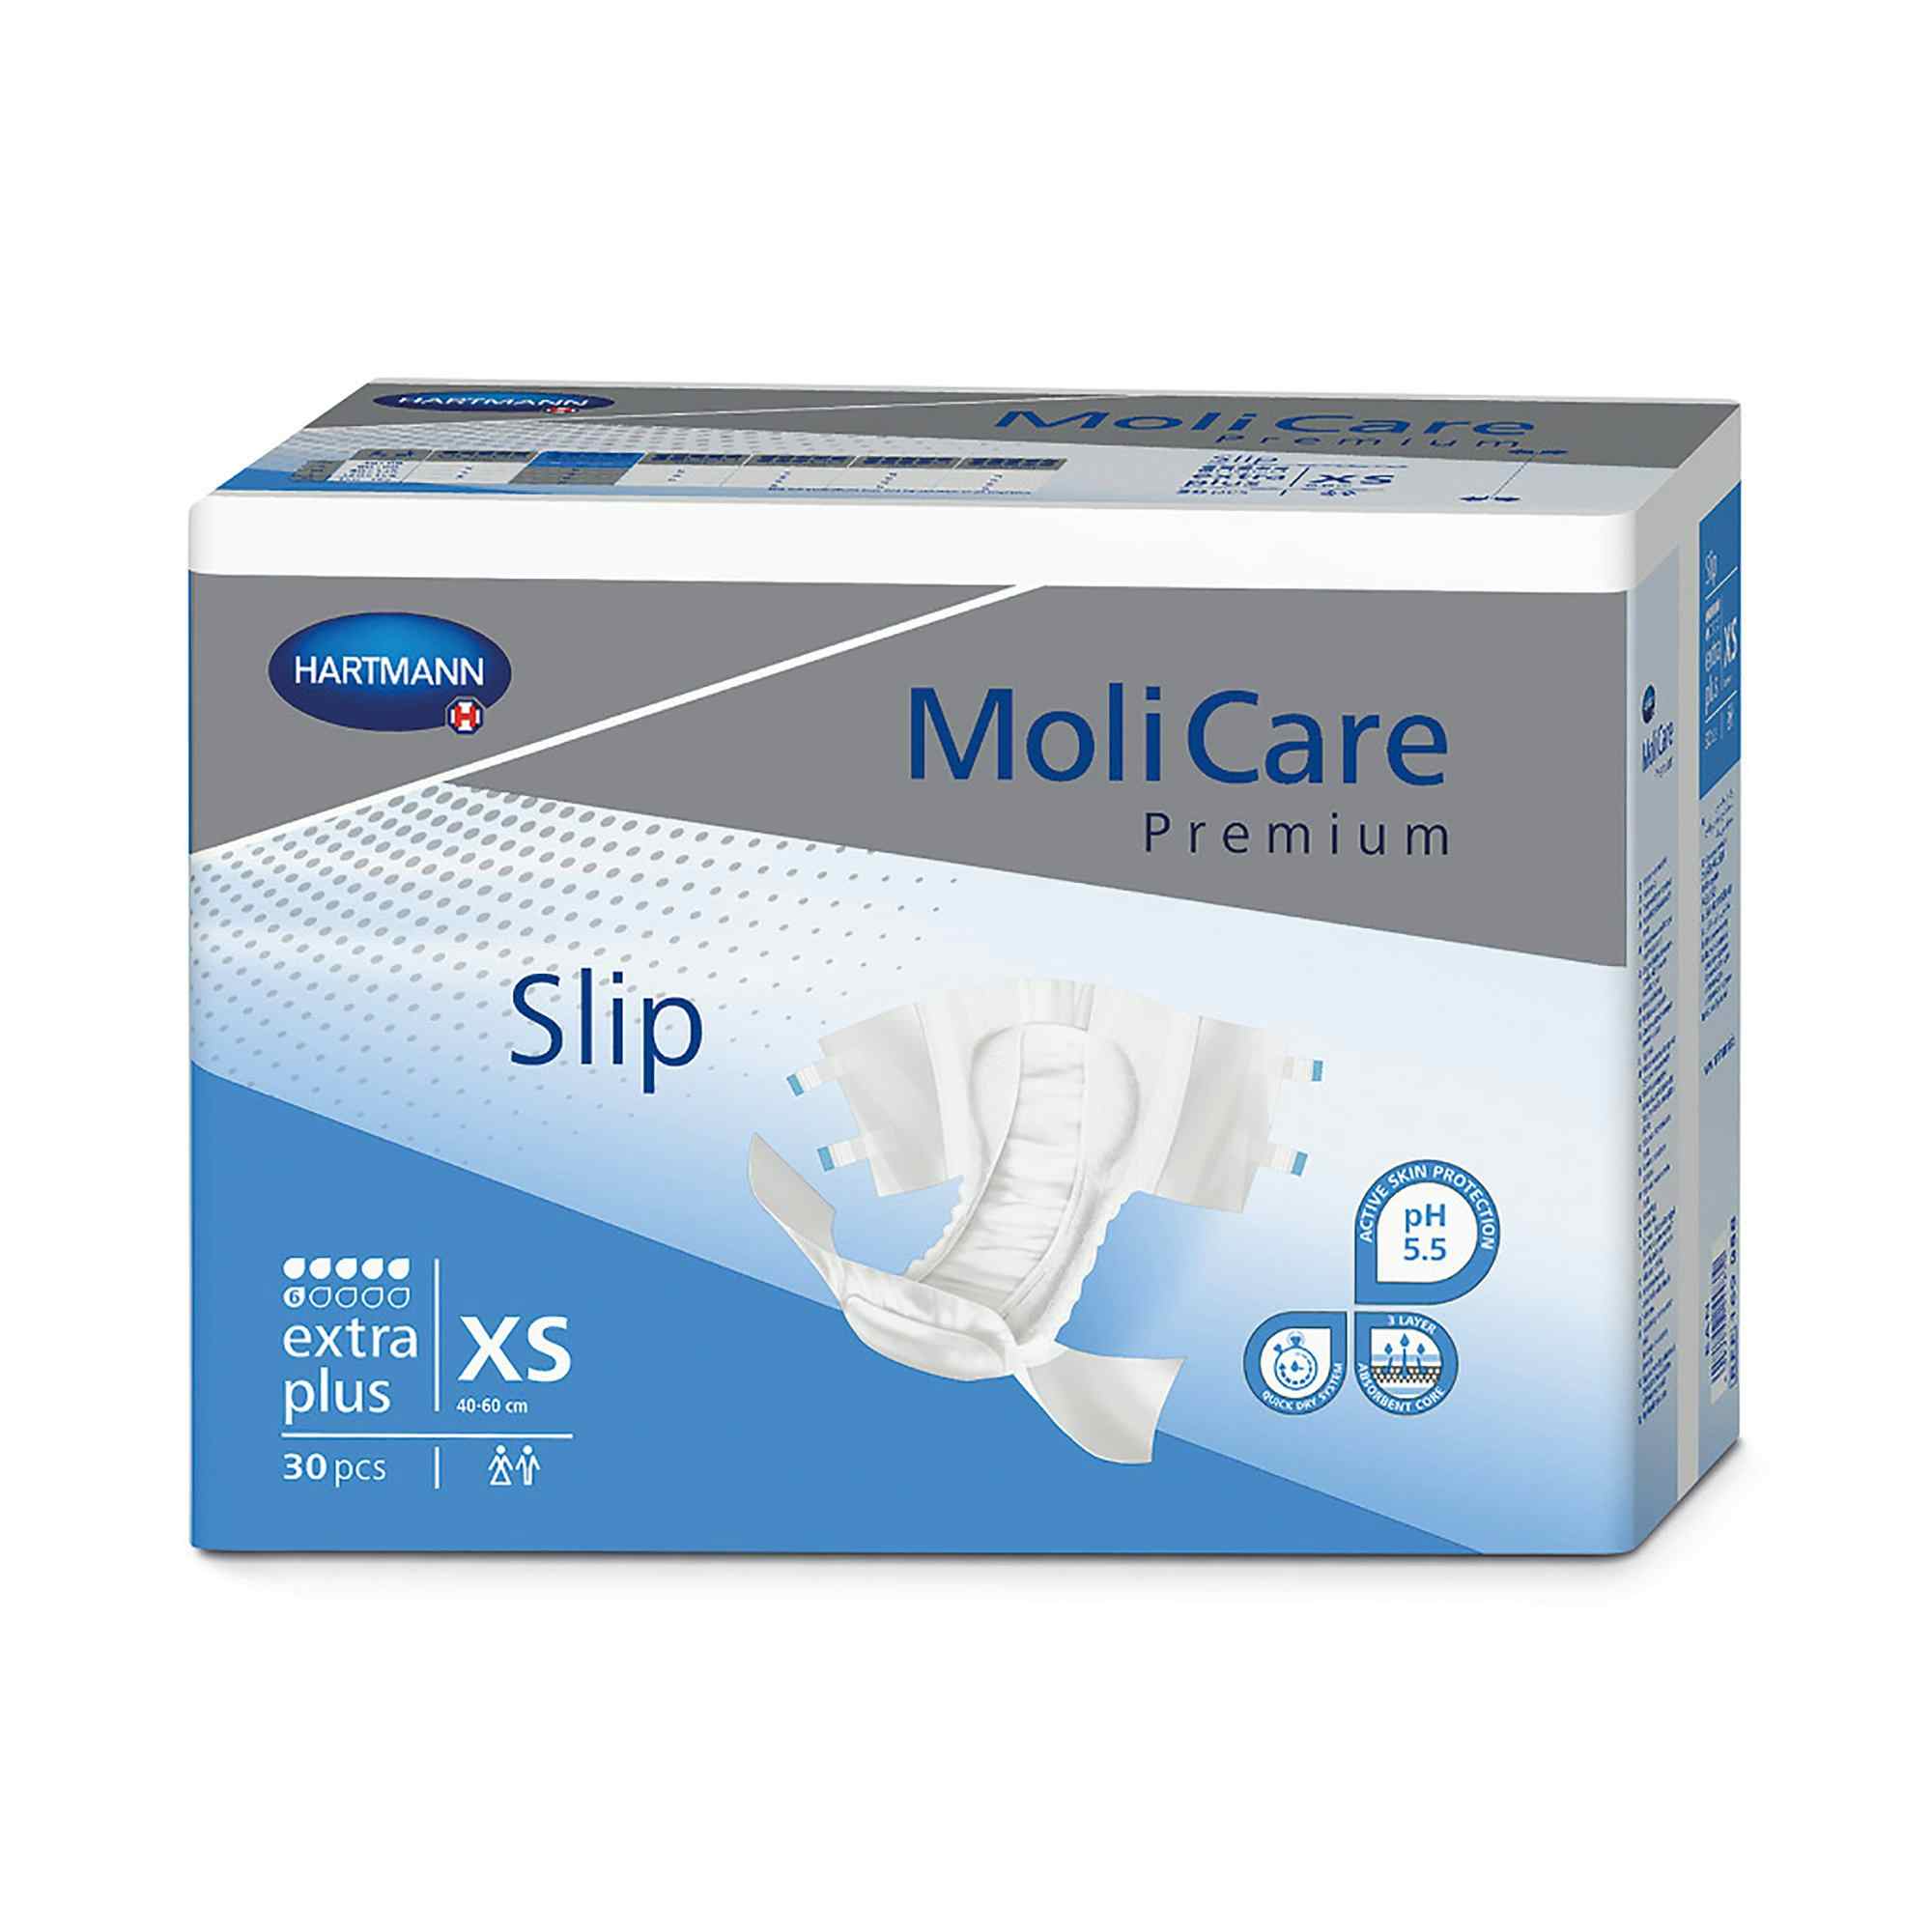 MoliCare Premium Slip Extra Plus Brief Adult Diapers with Tabs, Heavy Absorbency, 169248, X-Small (16-24") - Bag of 30